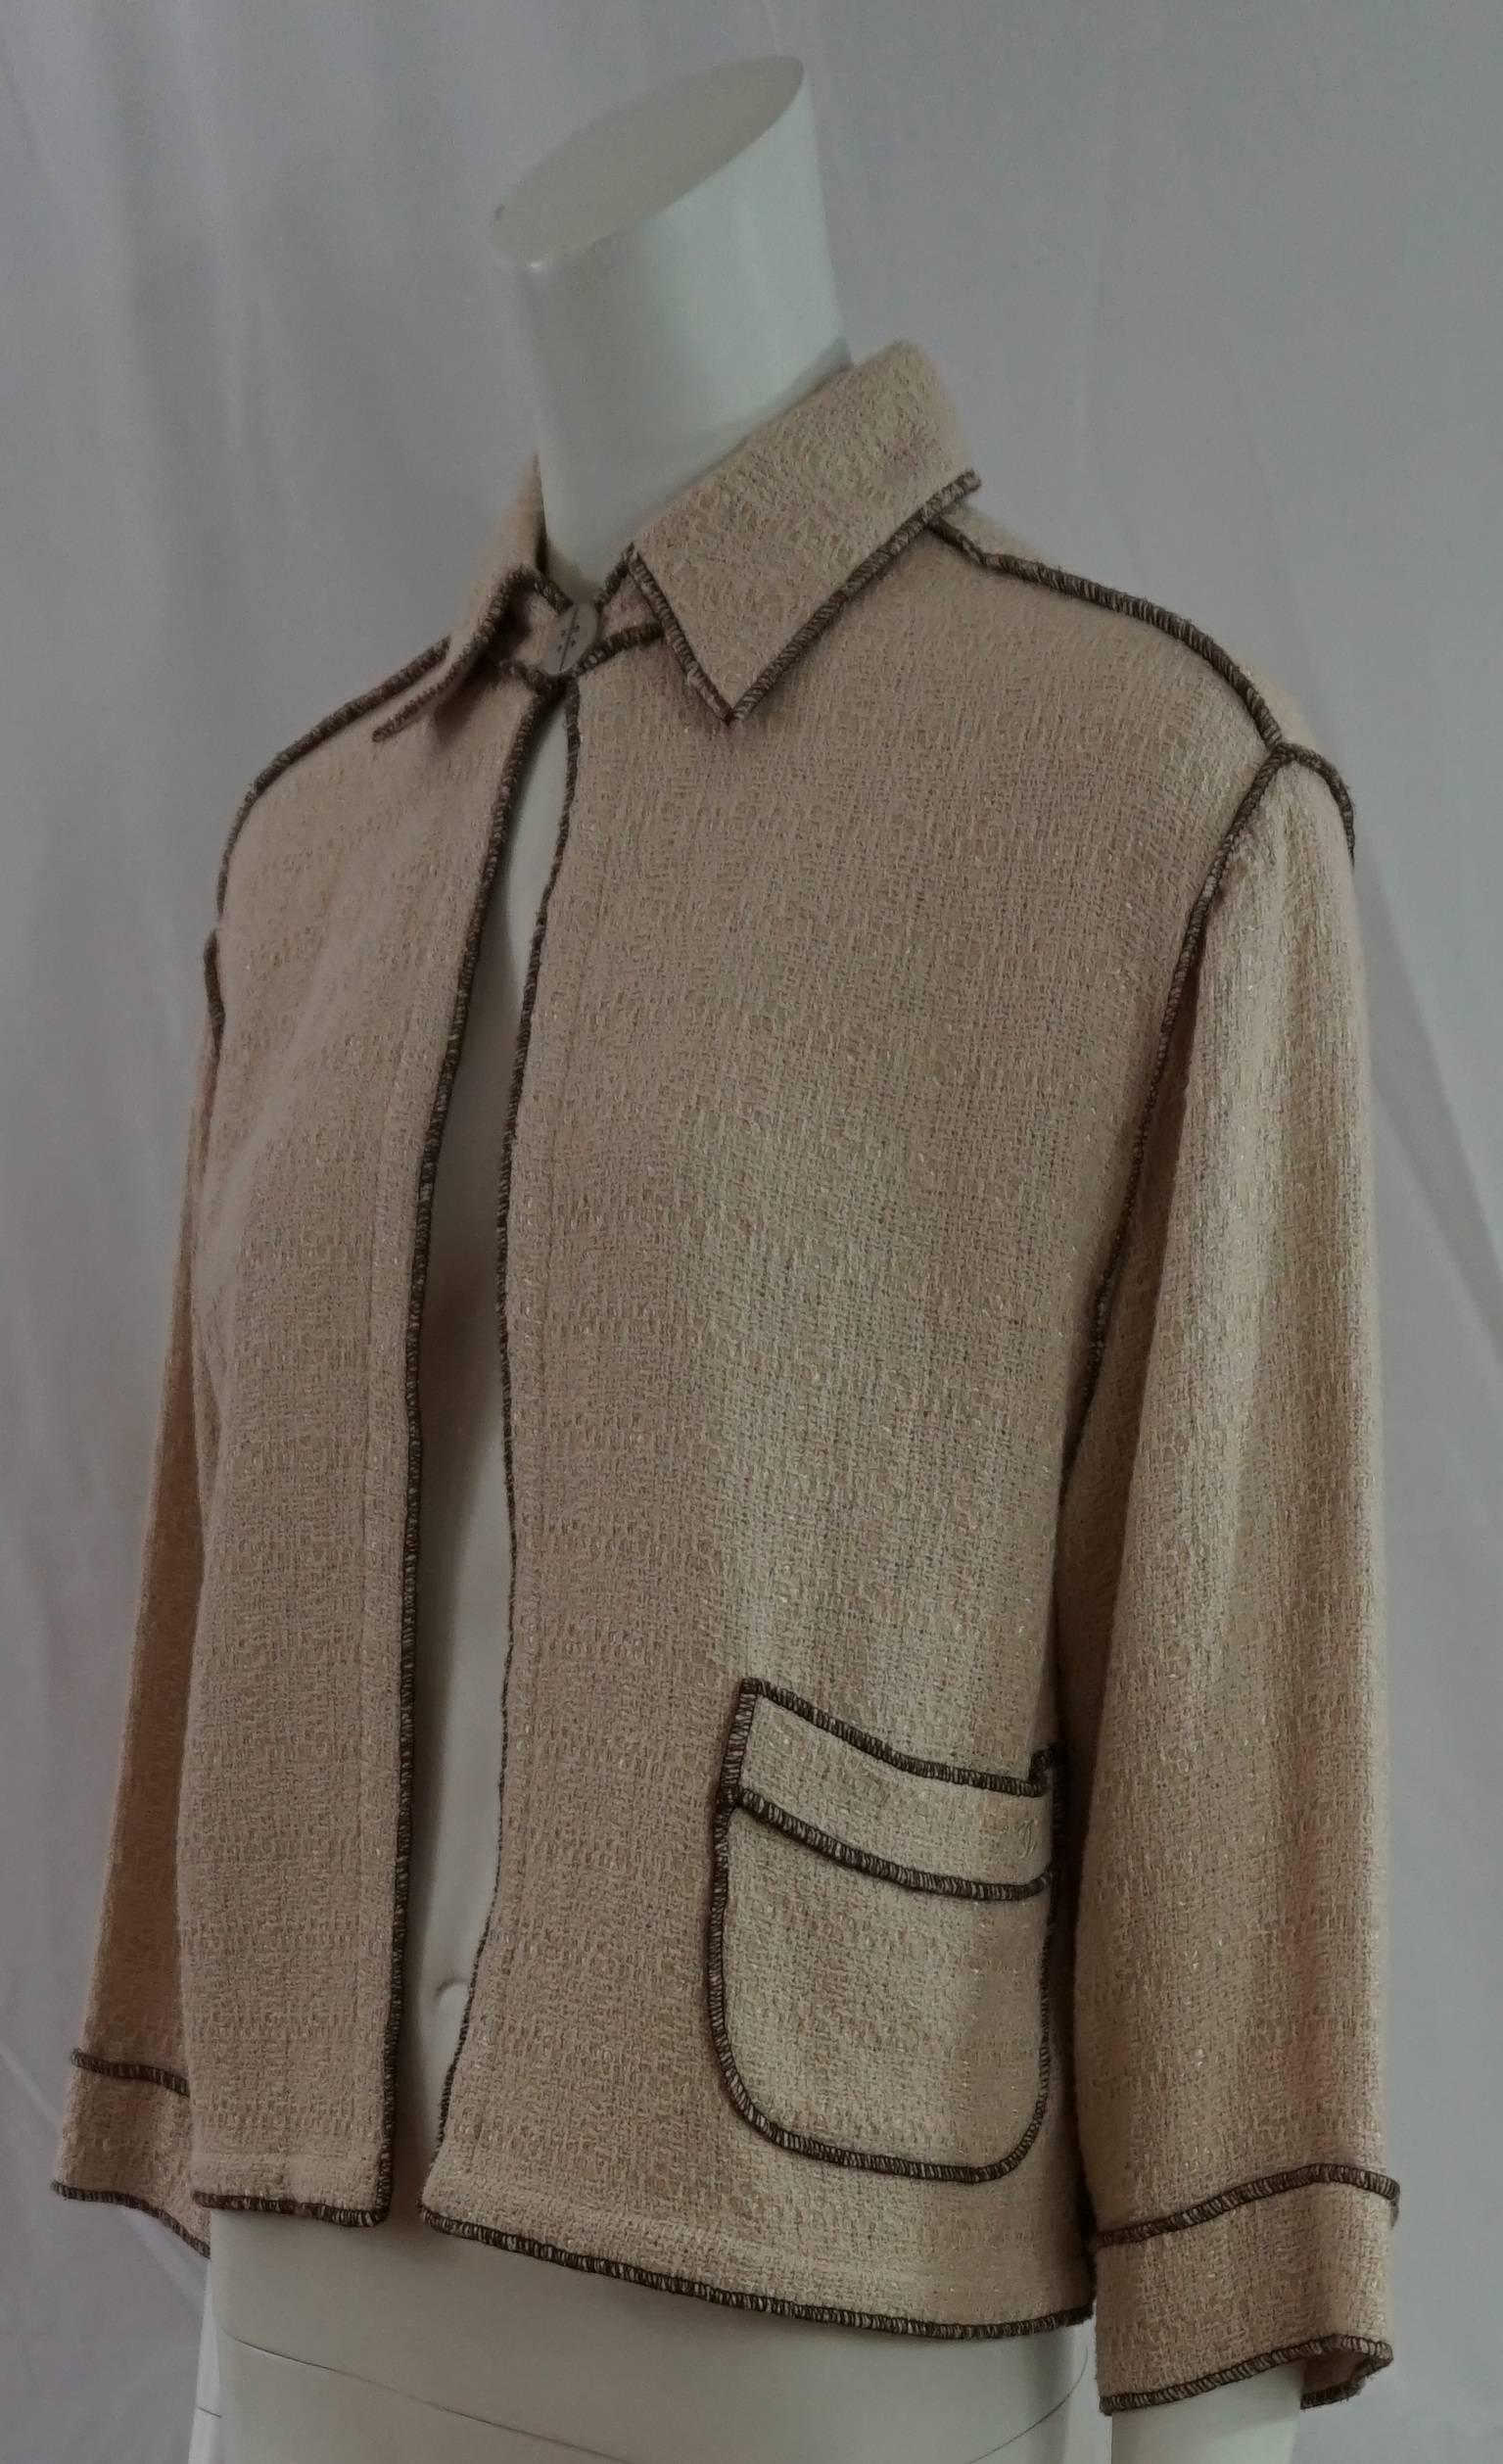 Chanel Runway Spring 1999 Collection Oatmeal Cotton Knit Jacket with Brown stitching - Size 38. This beautiful oatmeal/beige cotton knit blend lightweight box style/semi crop jacket has a 3/4 sleeve and a drop shoulder. It has one top silver tone